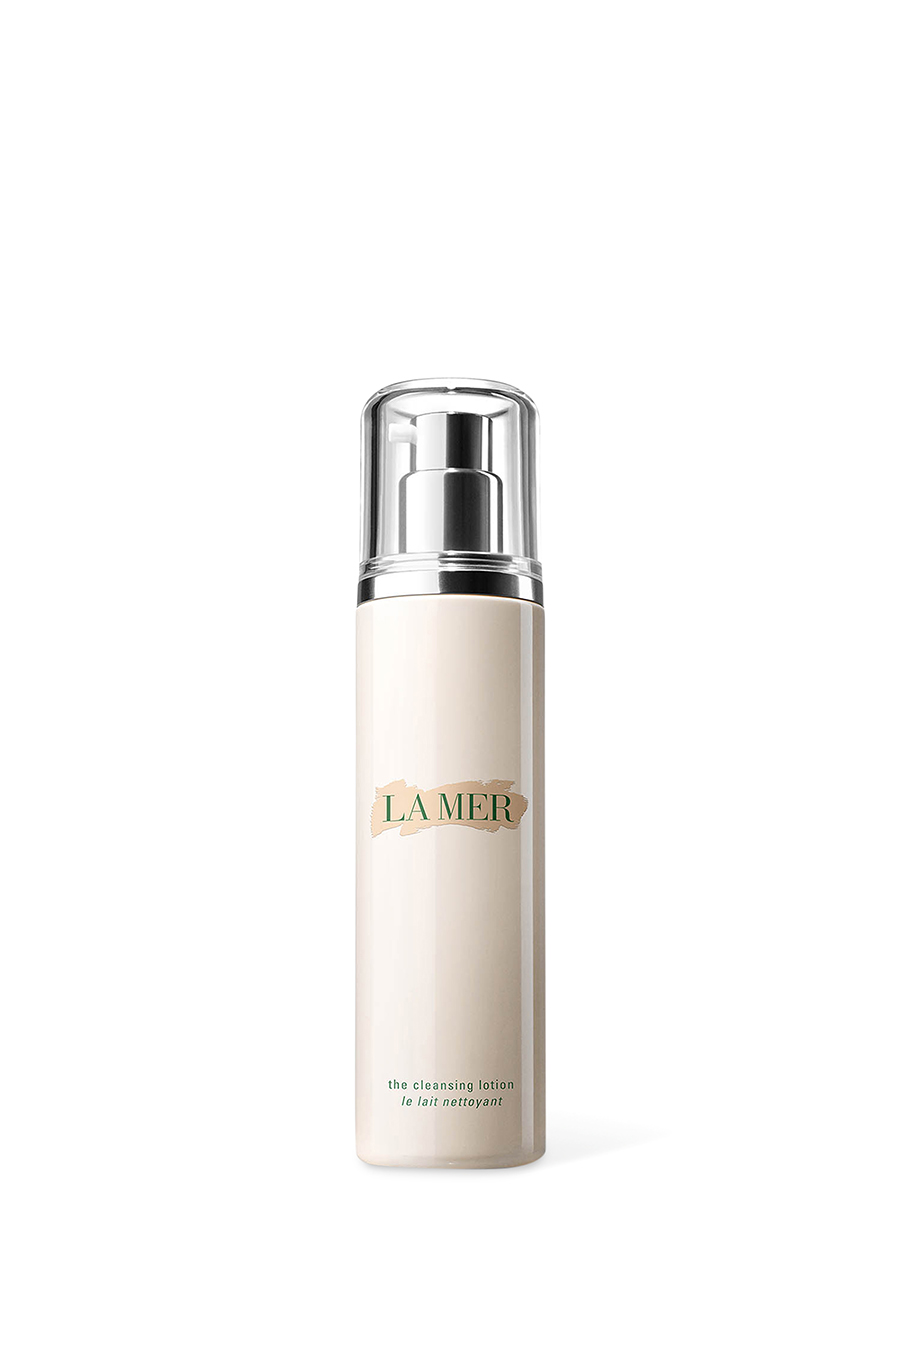 Buy La Mer The Cleansing Lotion for Unisex | Bloomingdale's Kuwait